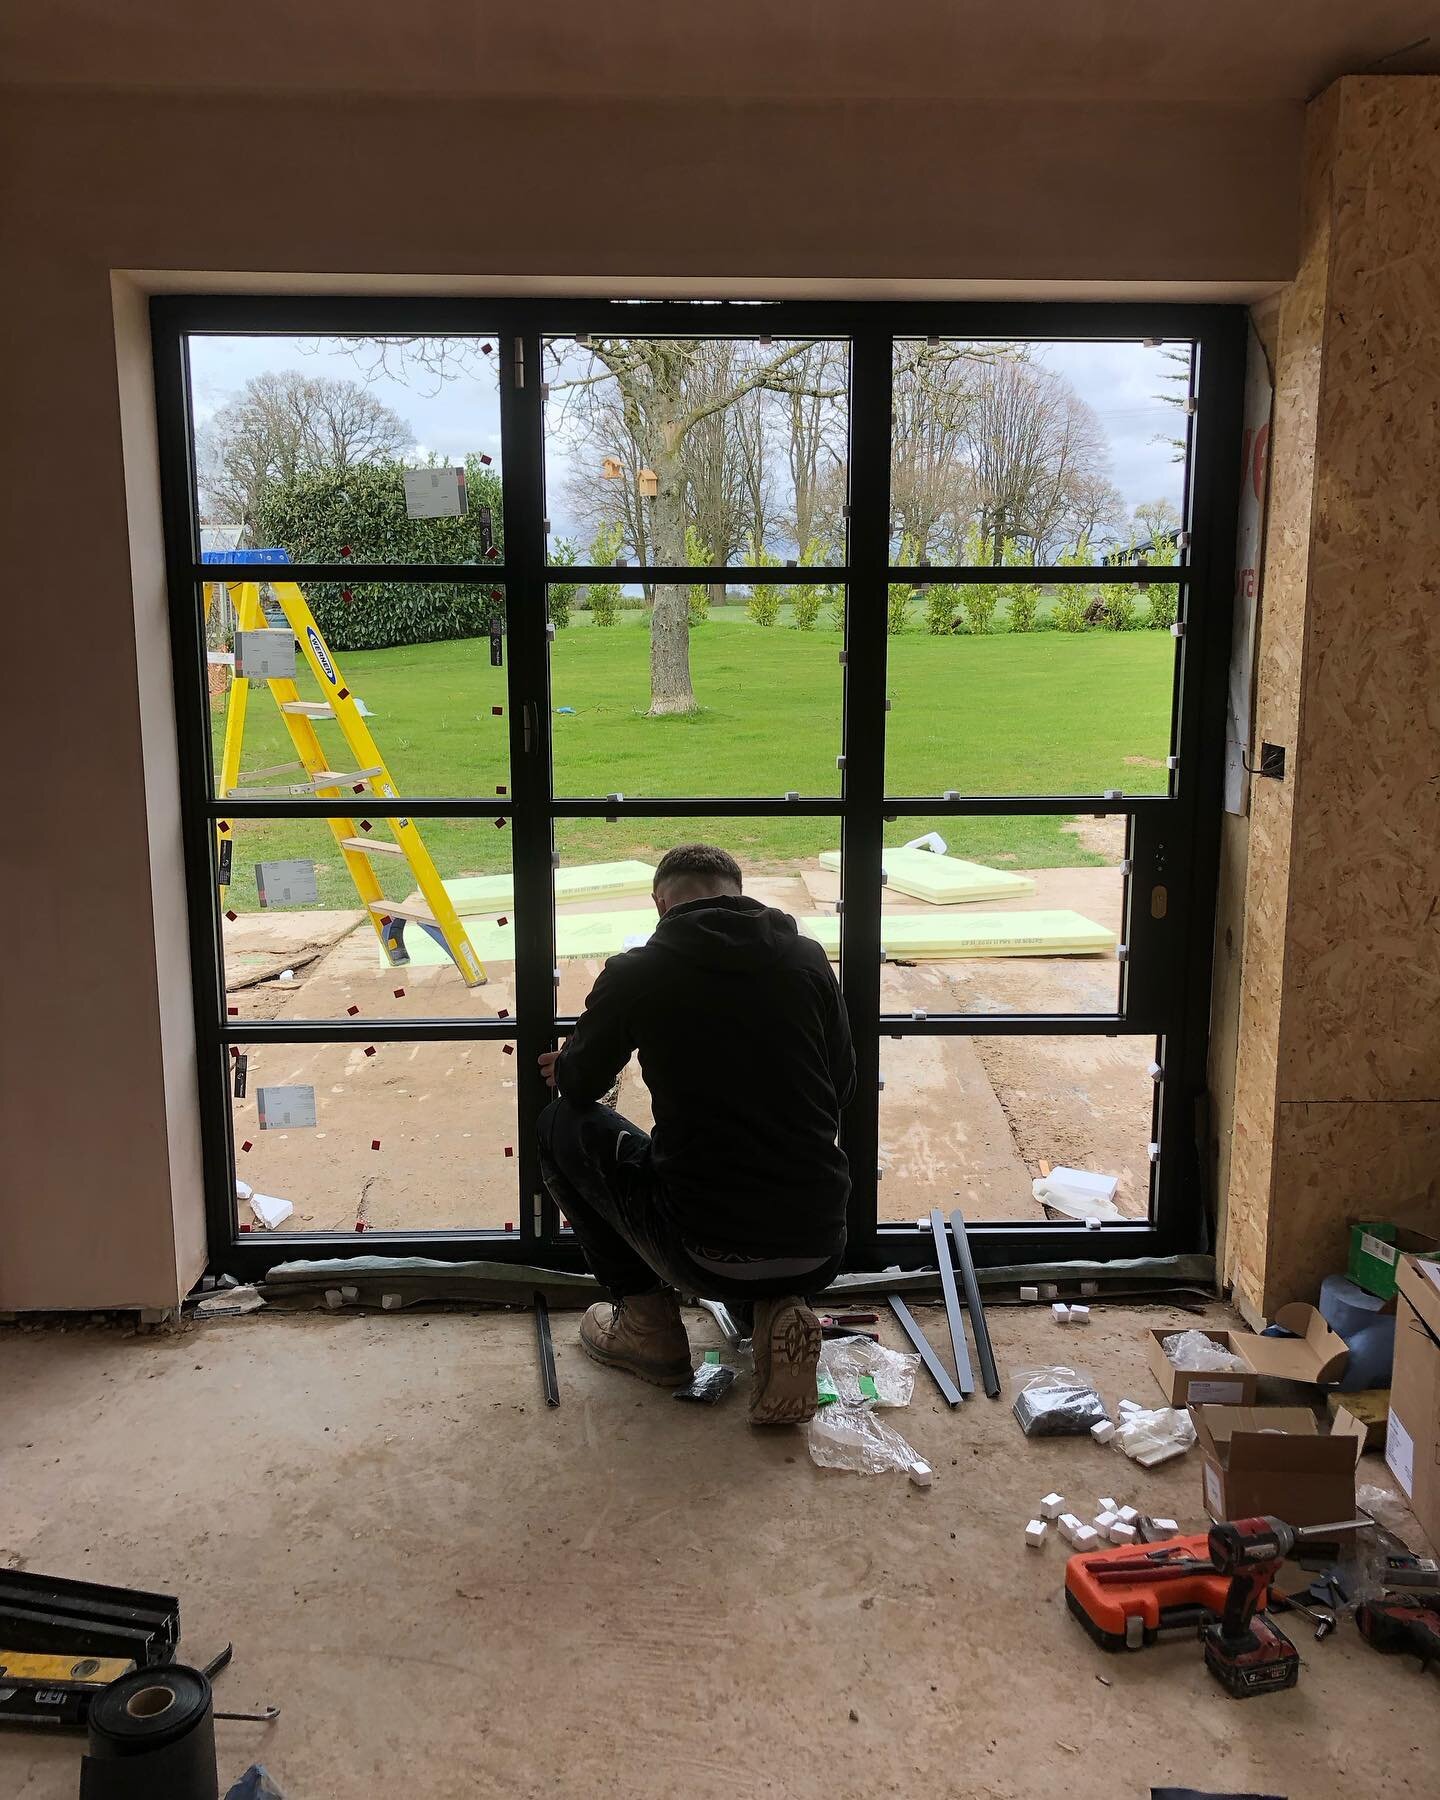 Good first day back after the Easter break. First of the window and door install going in @origin_global new Soho range looking pukka 👌

#bifolddoors #windowanddoors #outbuilding #guesthouse #poolhouse